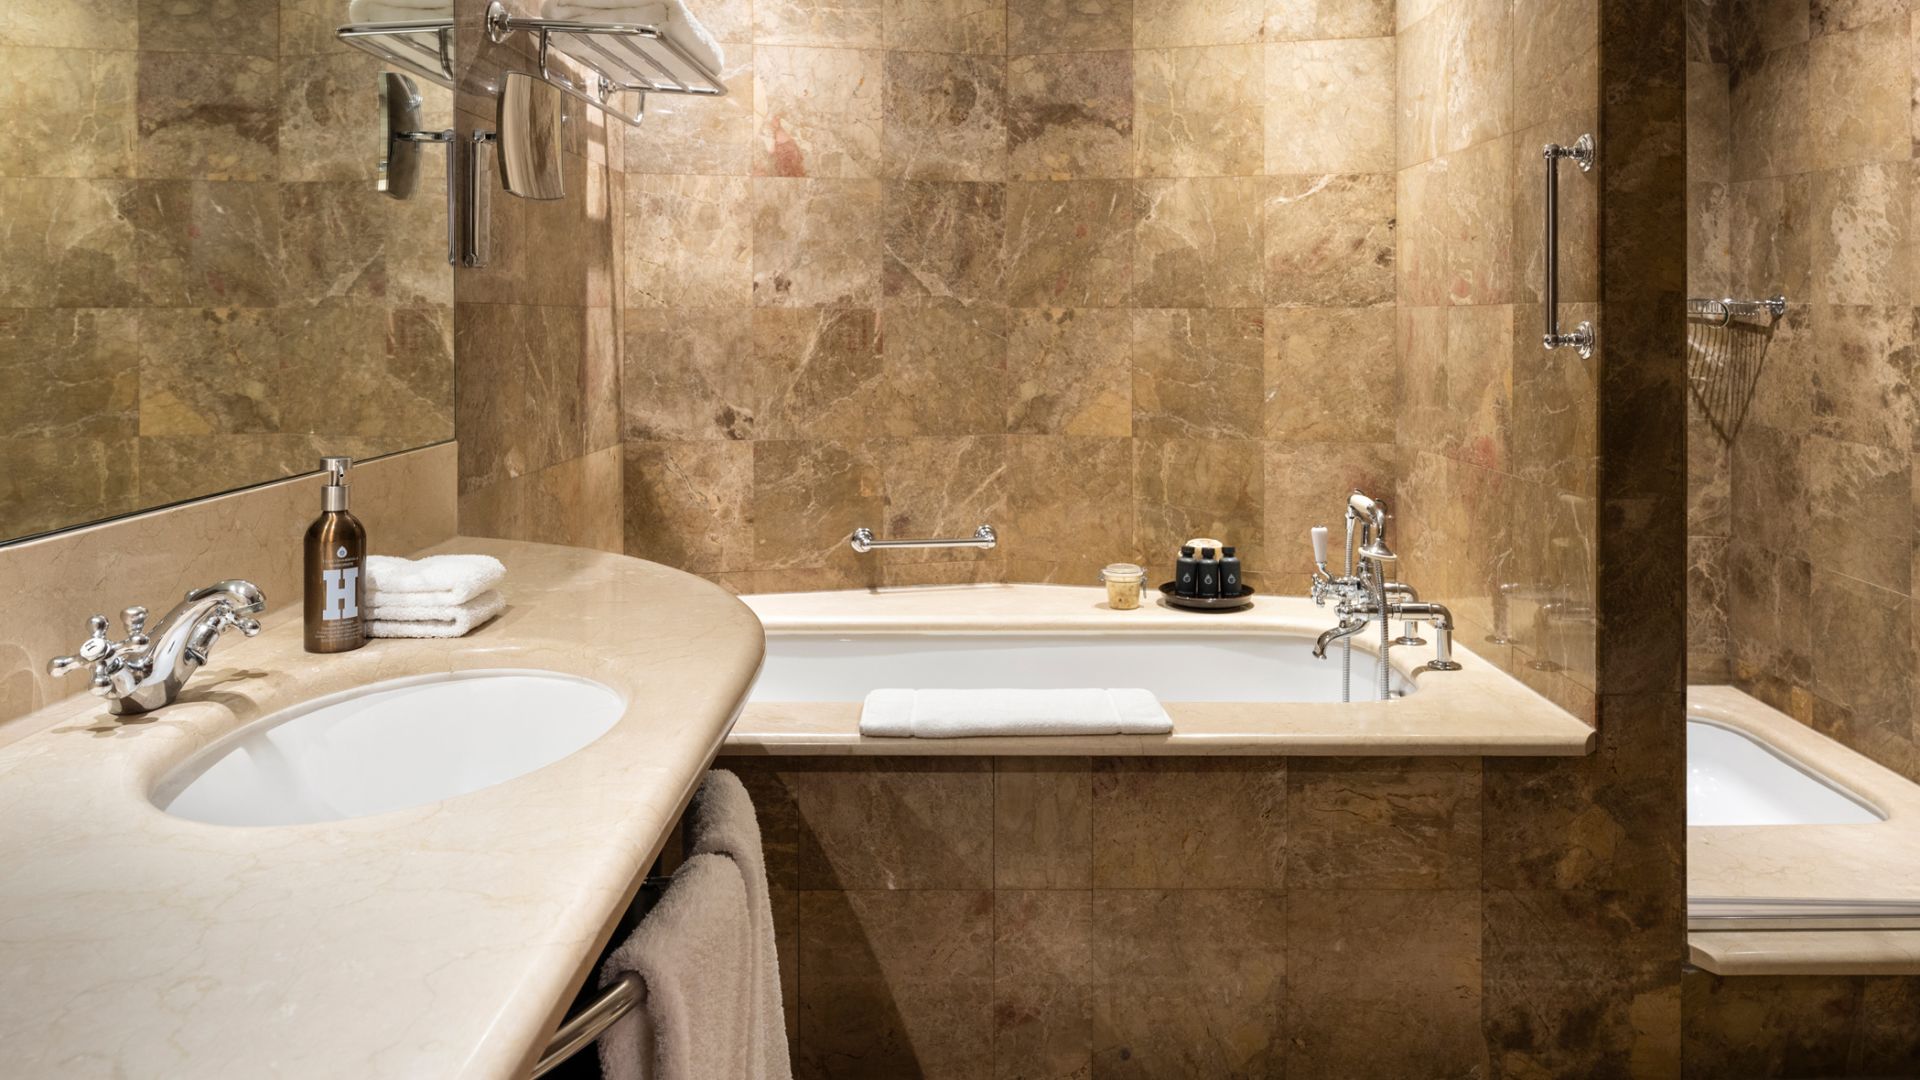 A Bathroom With A Marble Countertop - Image